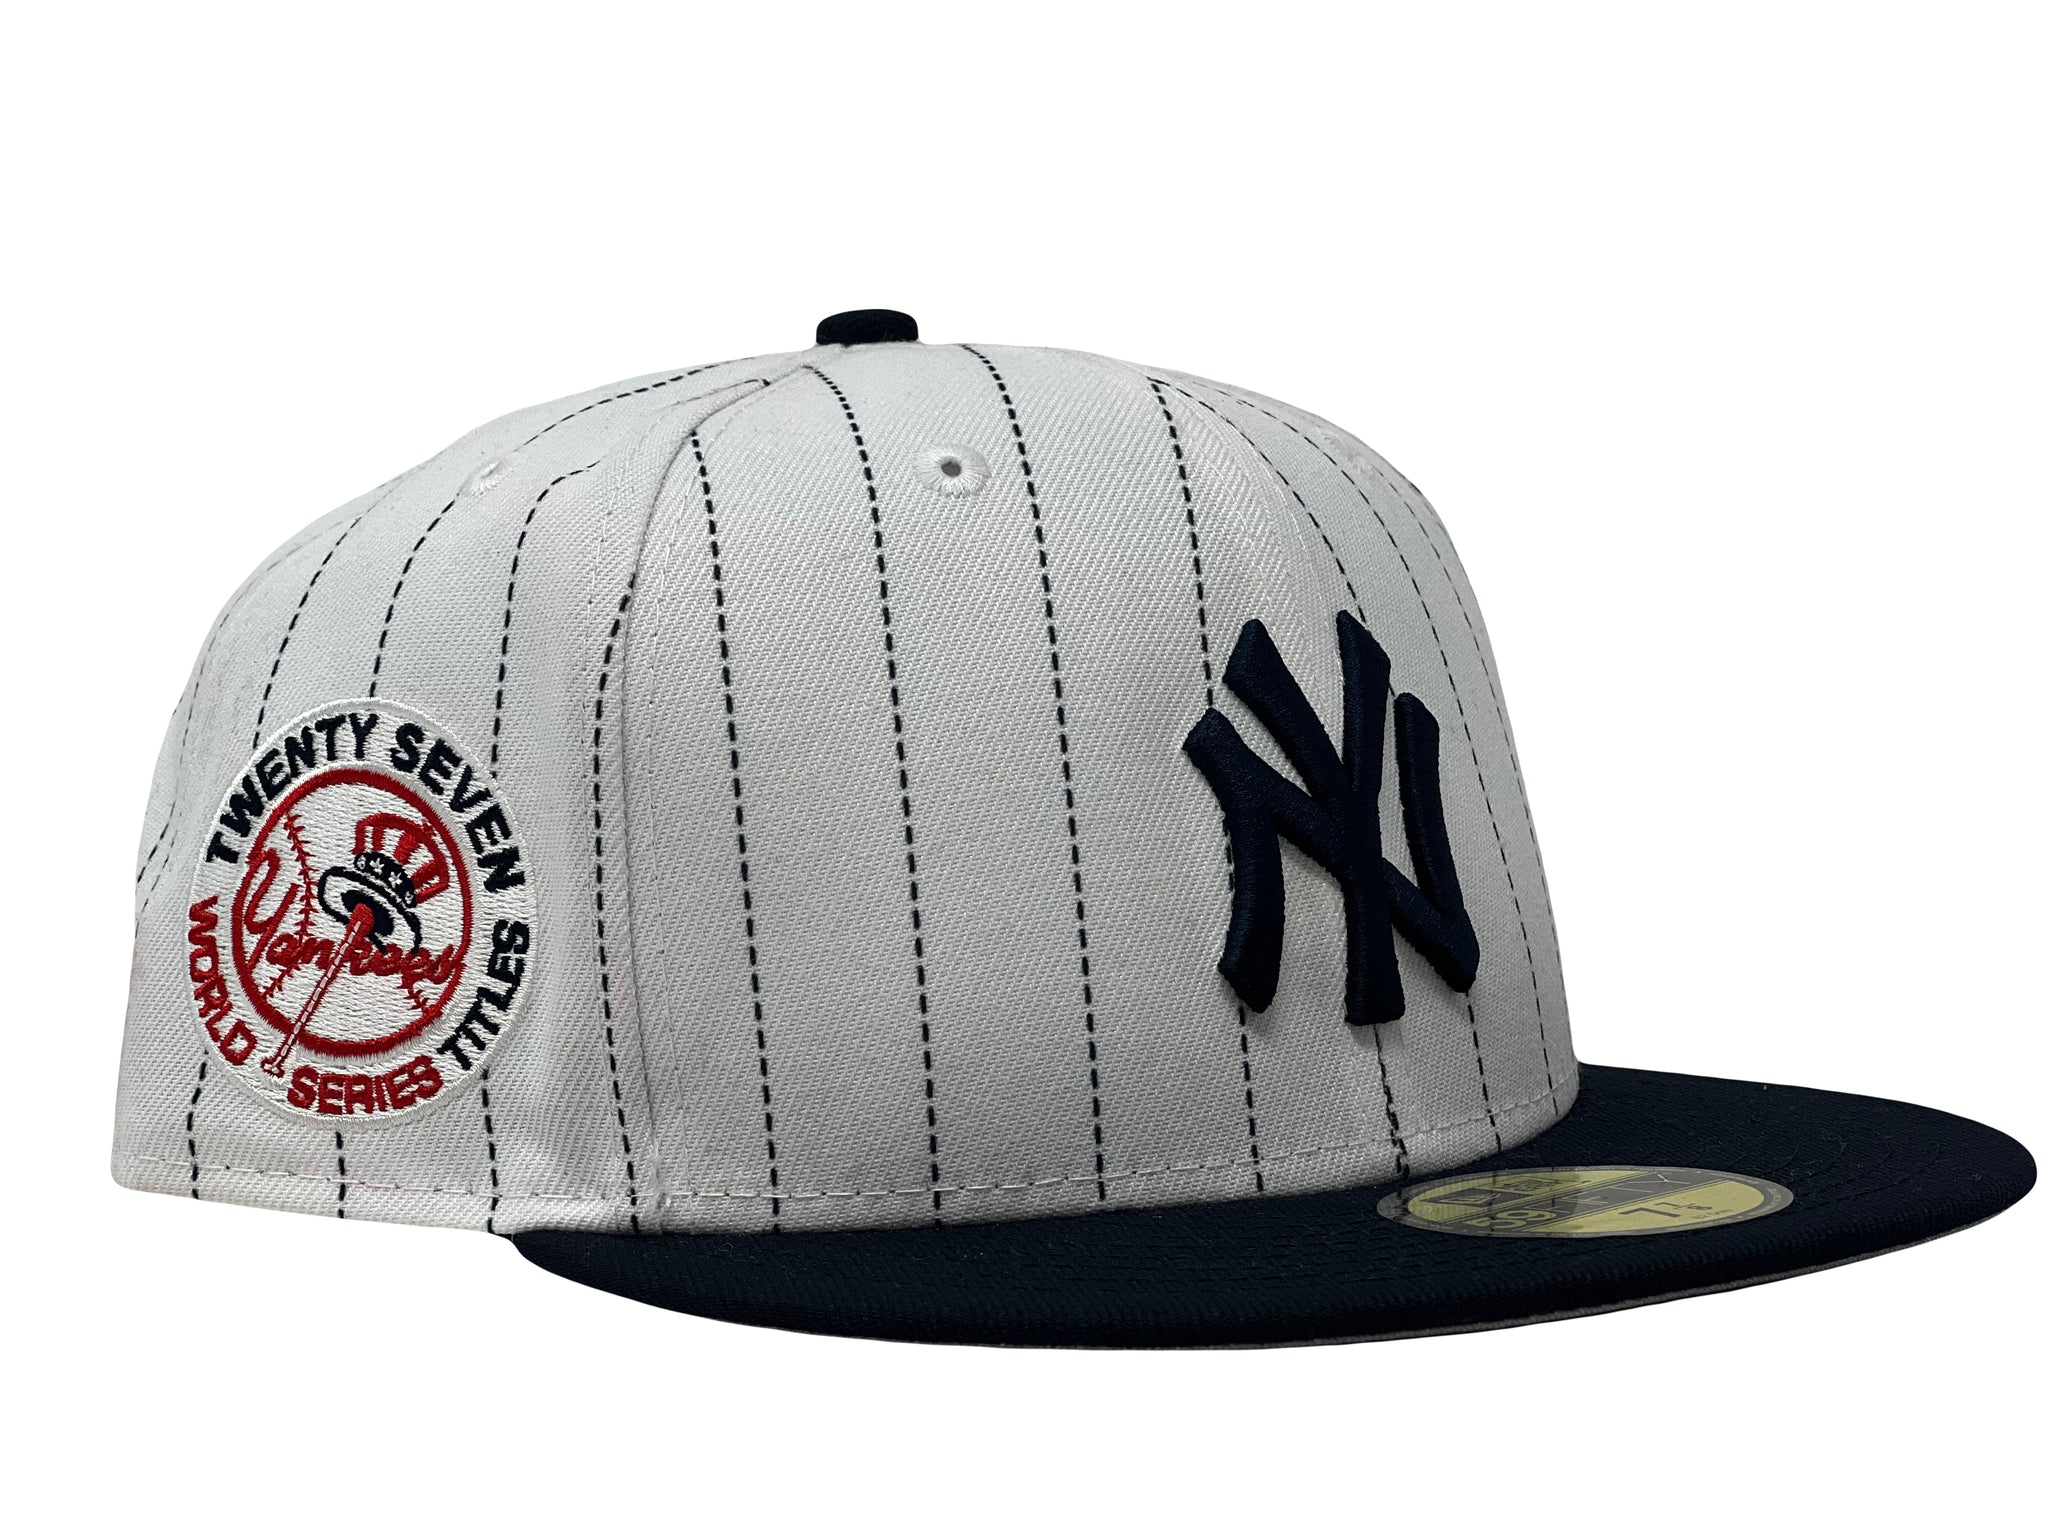 New York Yankees New Era 27x MLB World Series Champions 59FIFTY Fitted Hat  - Navy